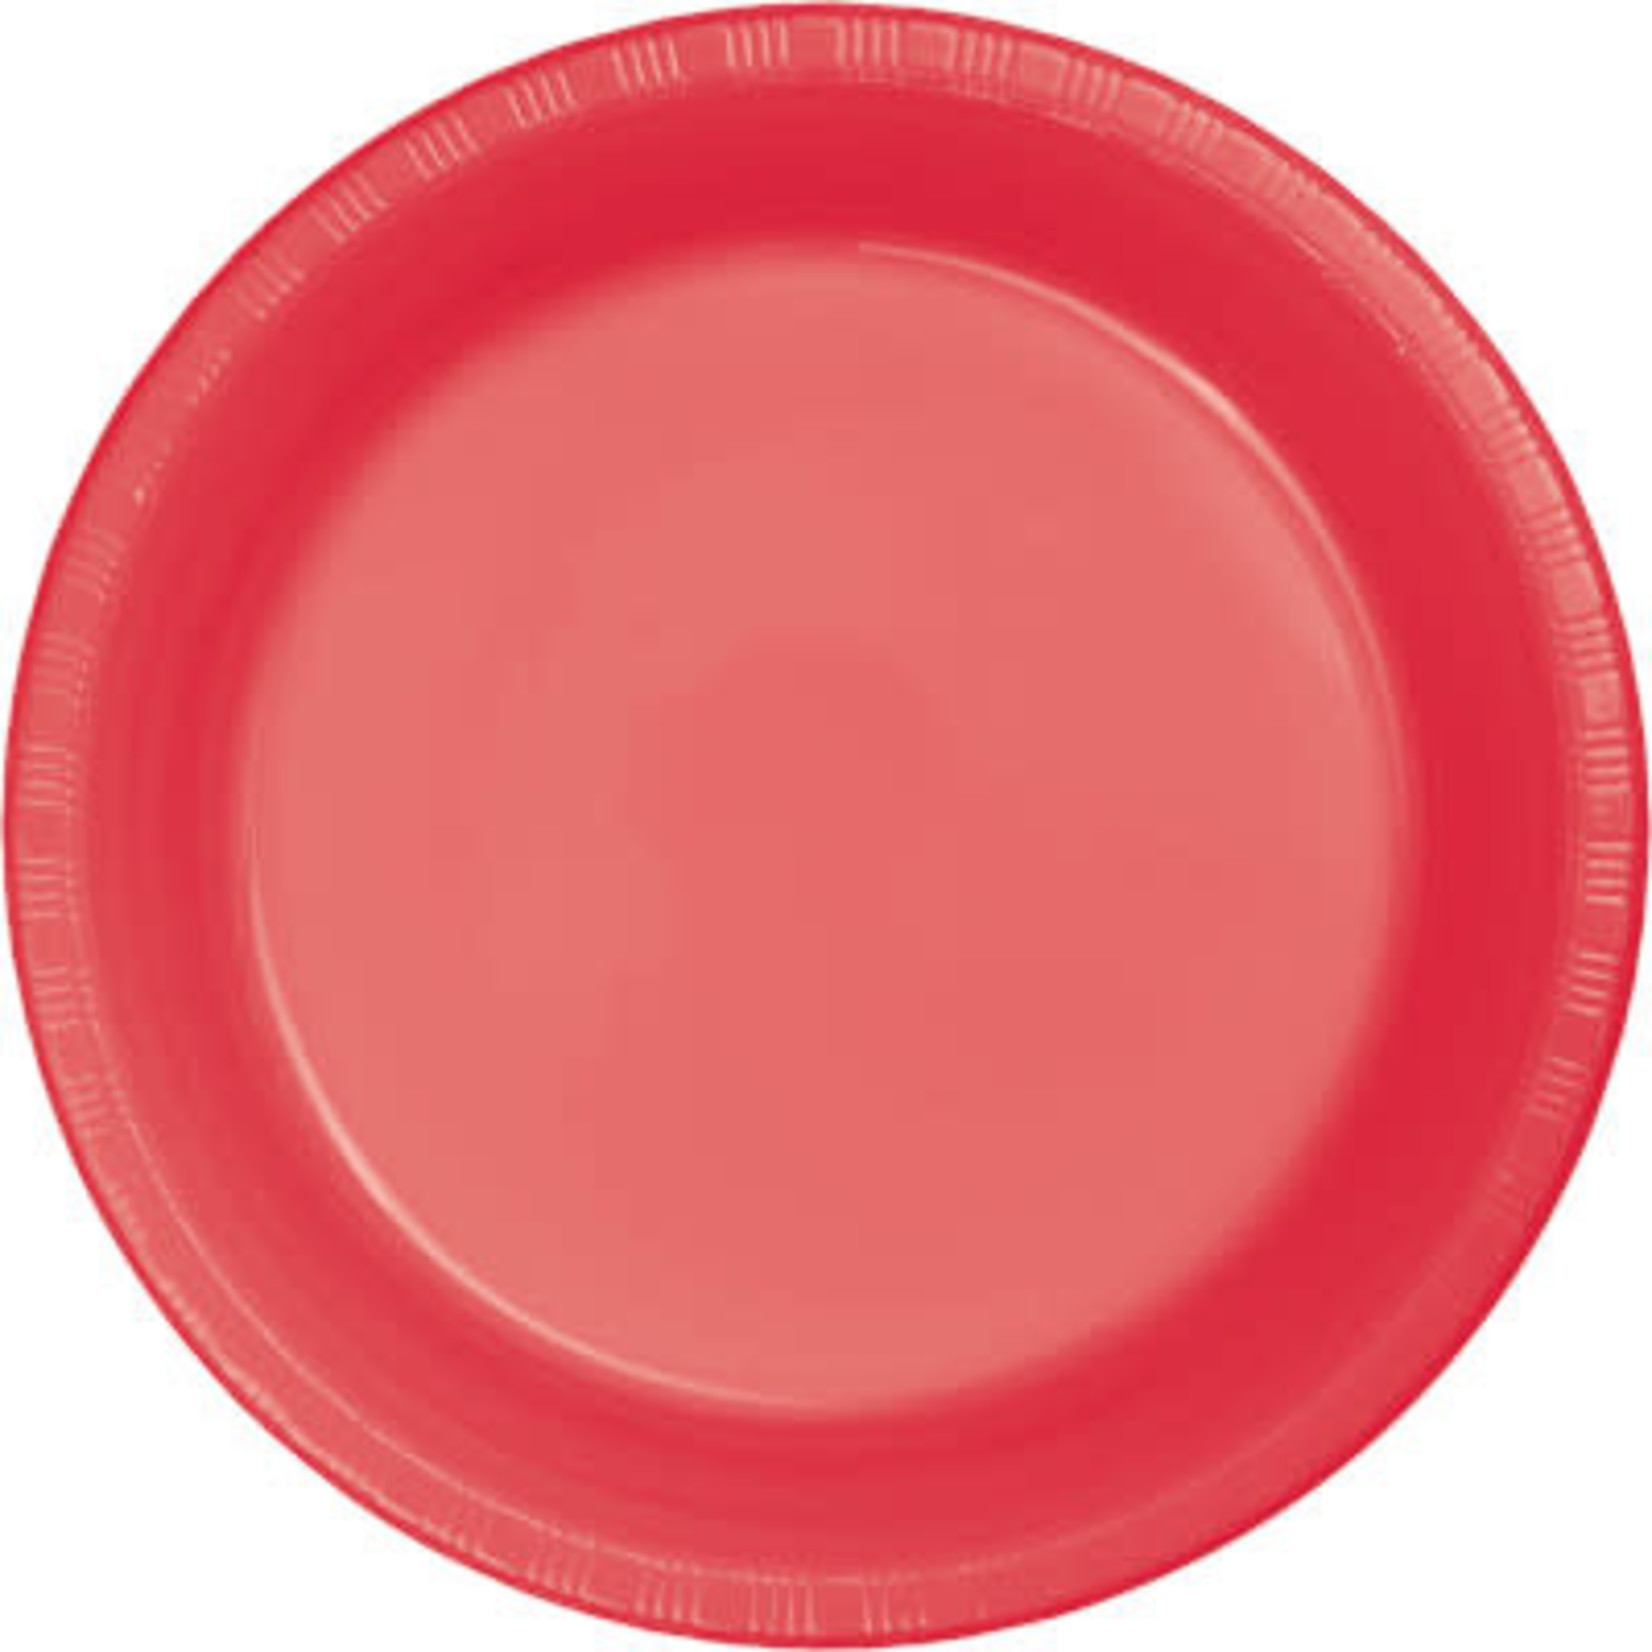 Touch of Color 7" Coral Paper Plates - 24ct.